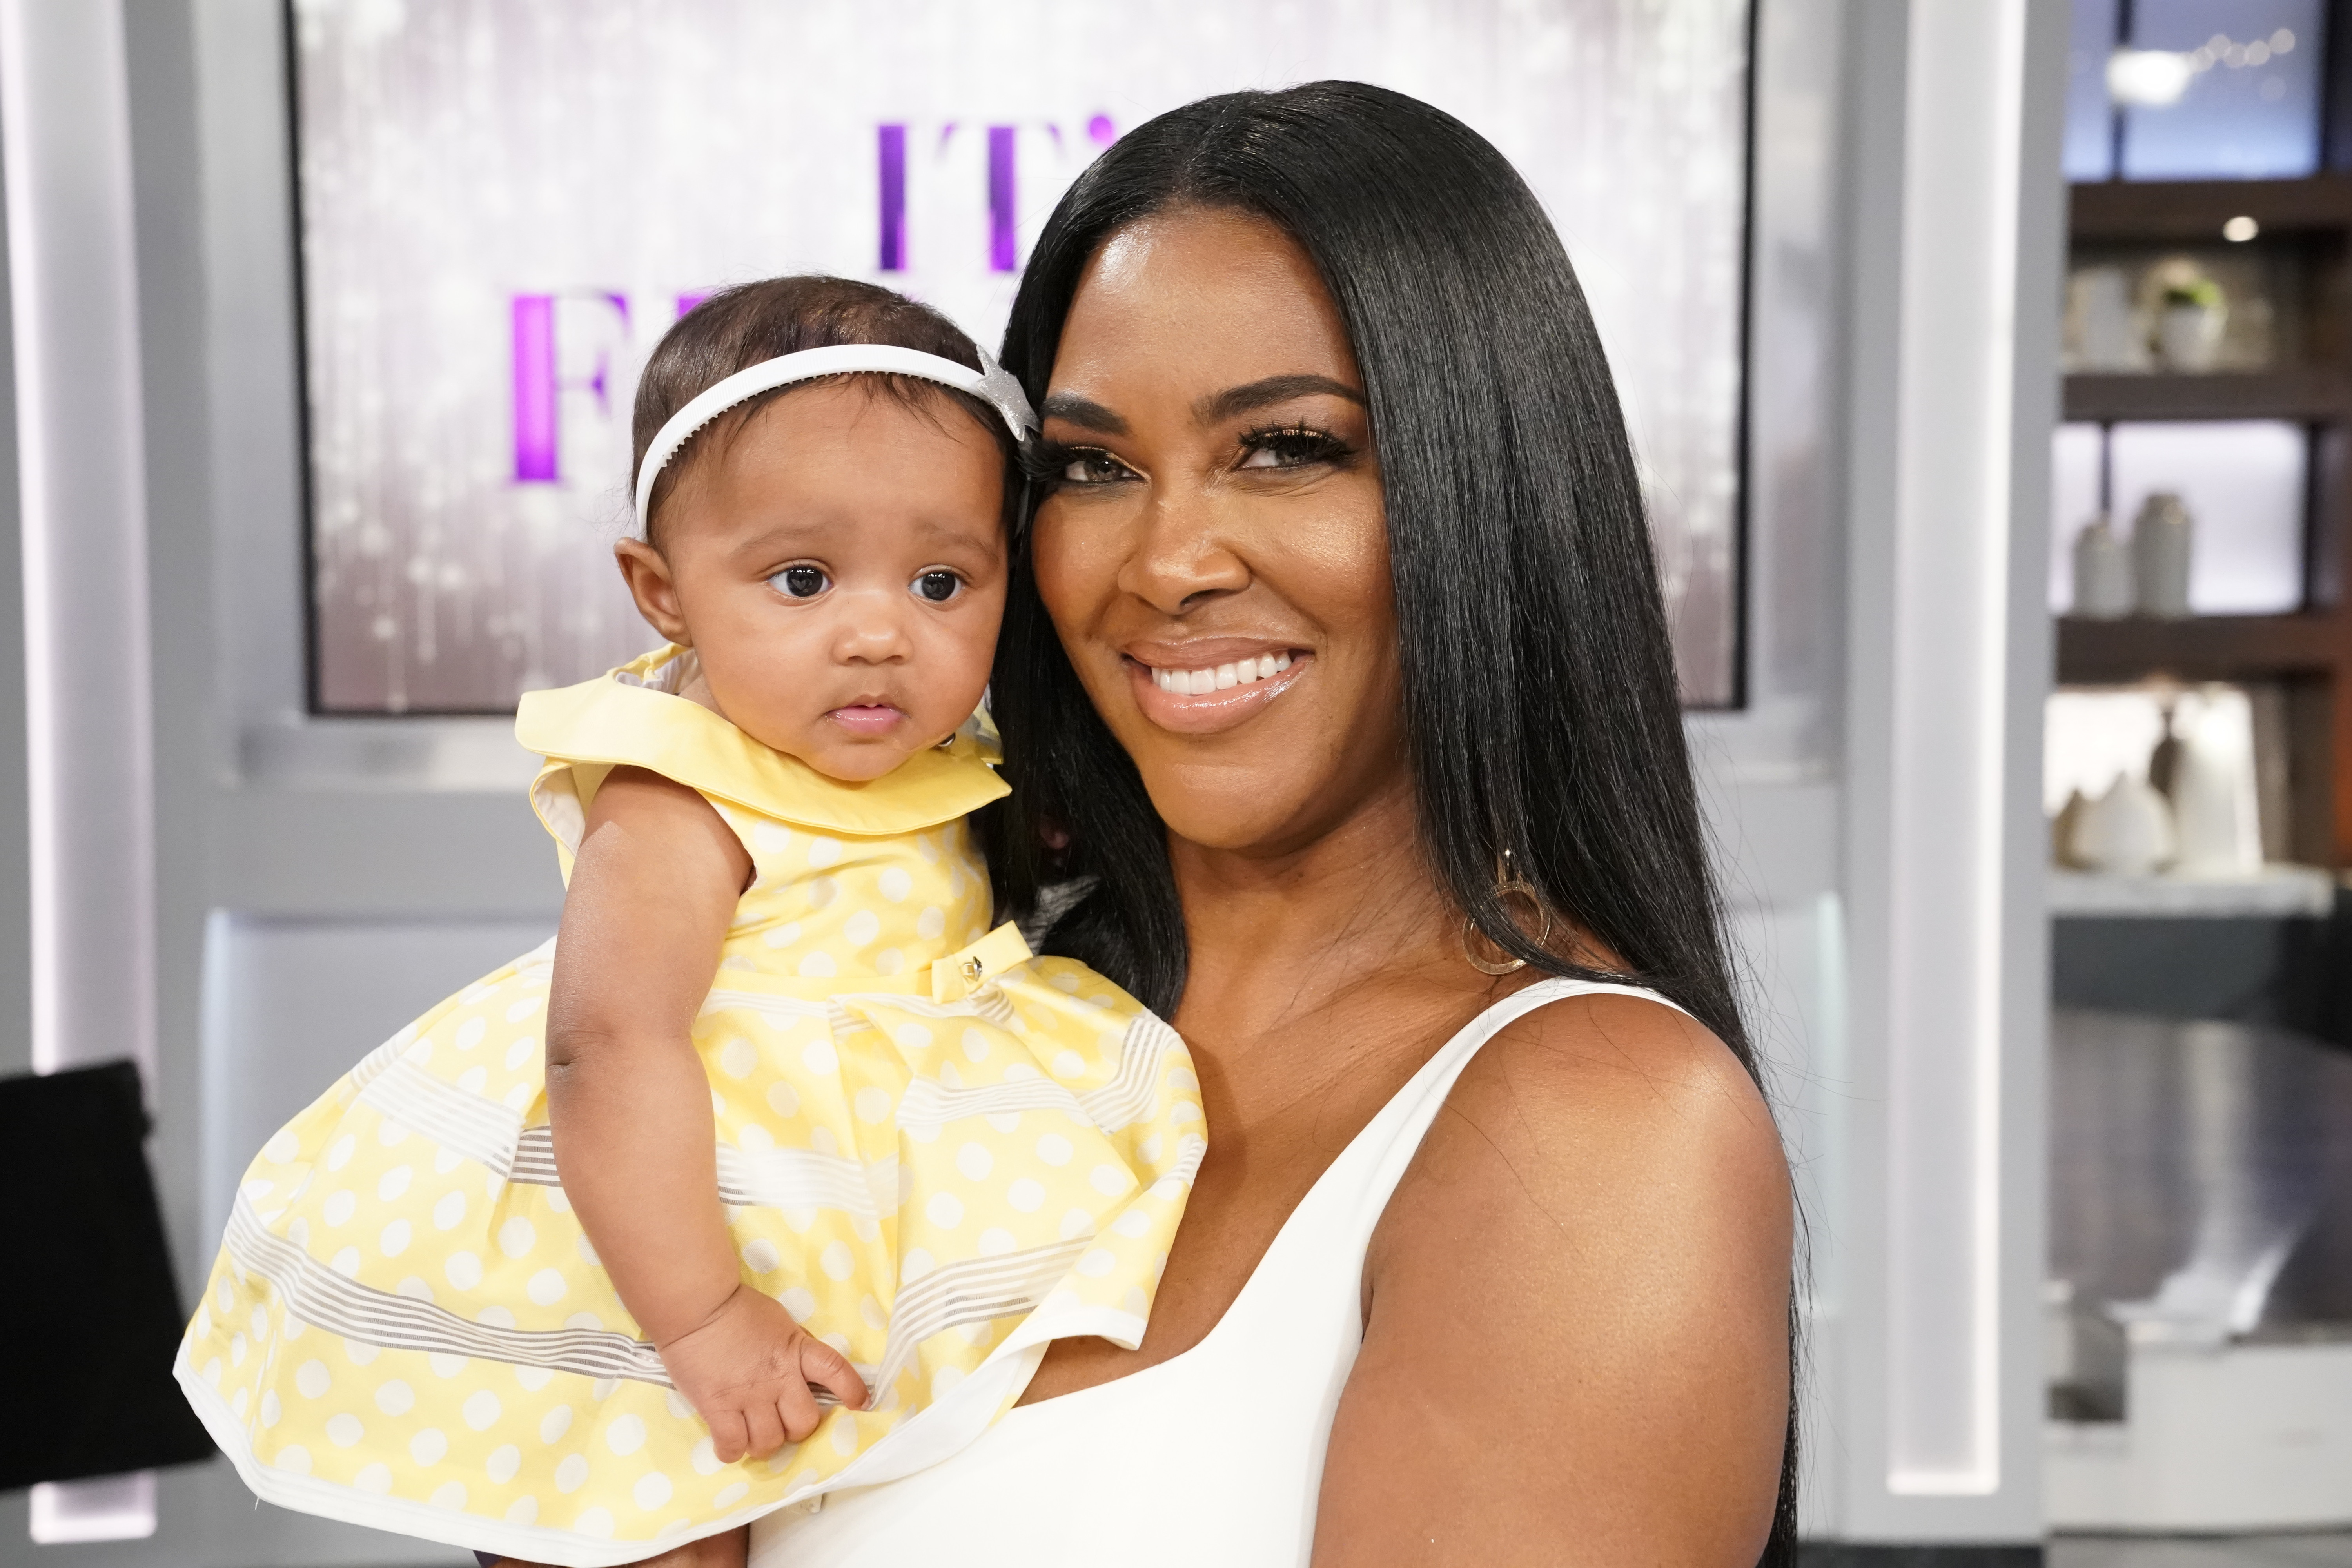 THE REAL’s Mother’s Day Show With Kenya Moore Daly! And Baby Brooklyn’s TV Debut.